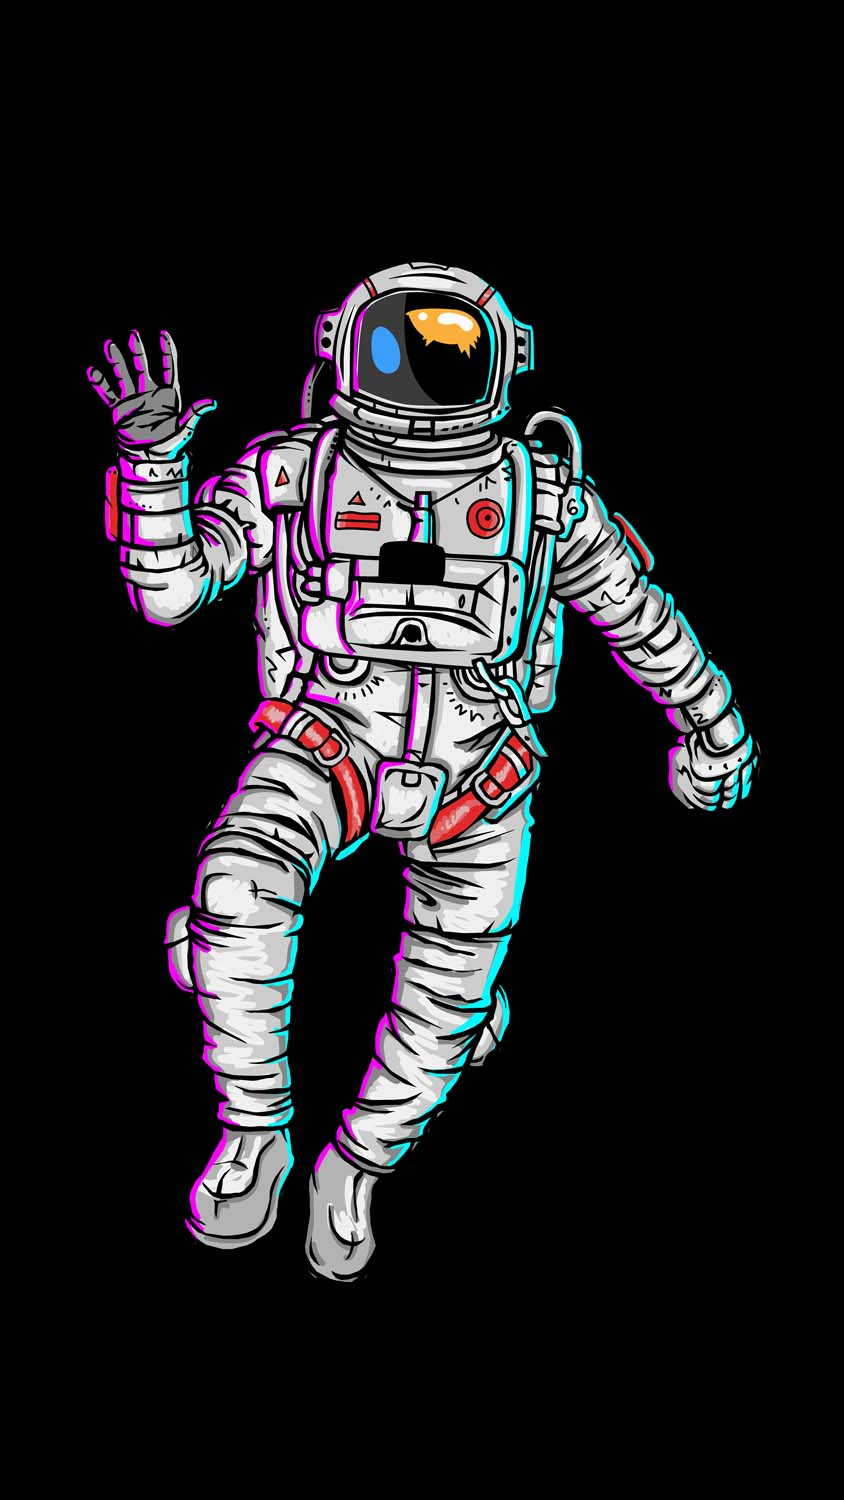 Space Hello IPhone Wallpaper HD  IPhone Wallpapers